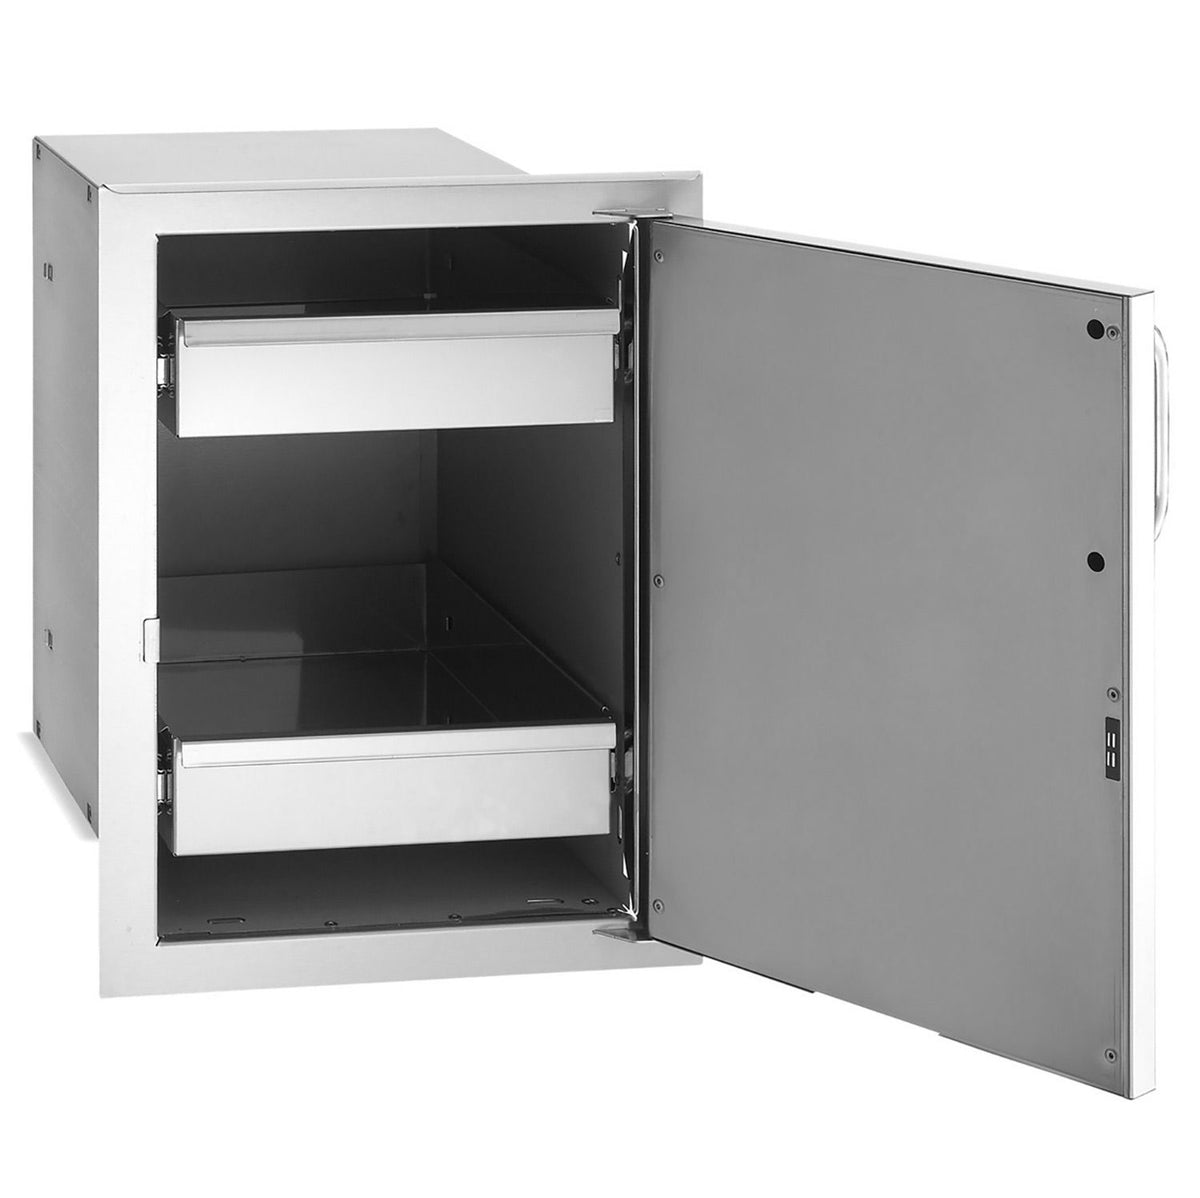 Fire Magic Premium Flush 14 Inch Enclosed Cabinet Storage With Drawers